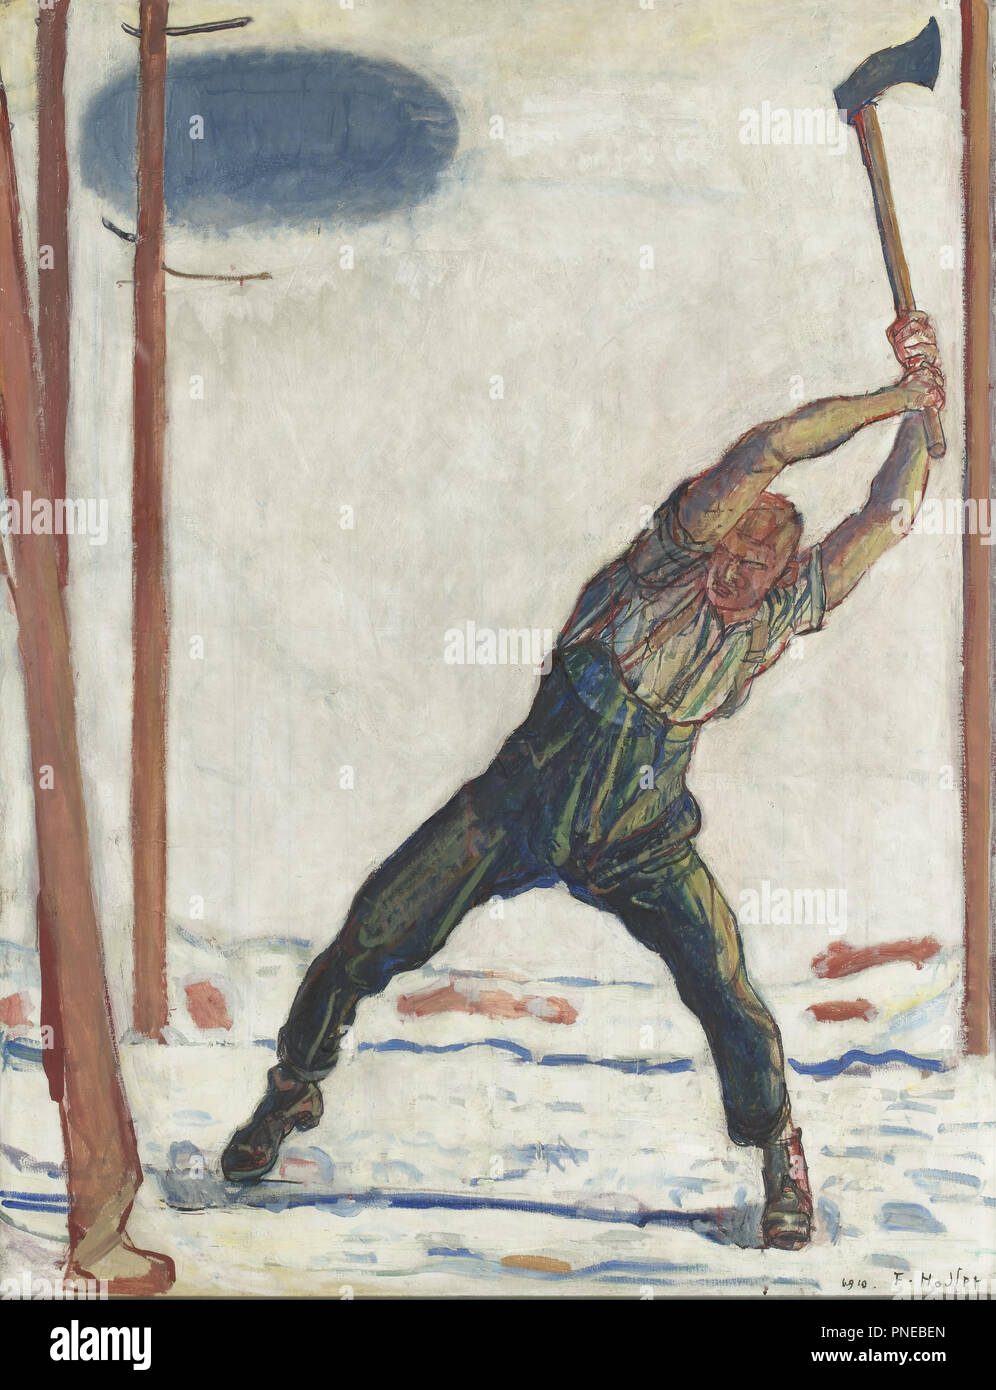 Der Holzfäller (Le bûcheron) The Woodcutter. Date/Period: 1910. Painting. Oil on canvas. Height: 1,300 mm (51.18 in); Width: 1,010 mm (39.76 in). Author: Fernidand Hodler. HODLER, FERDINAND. Stock Photo